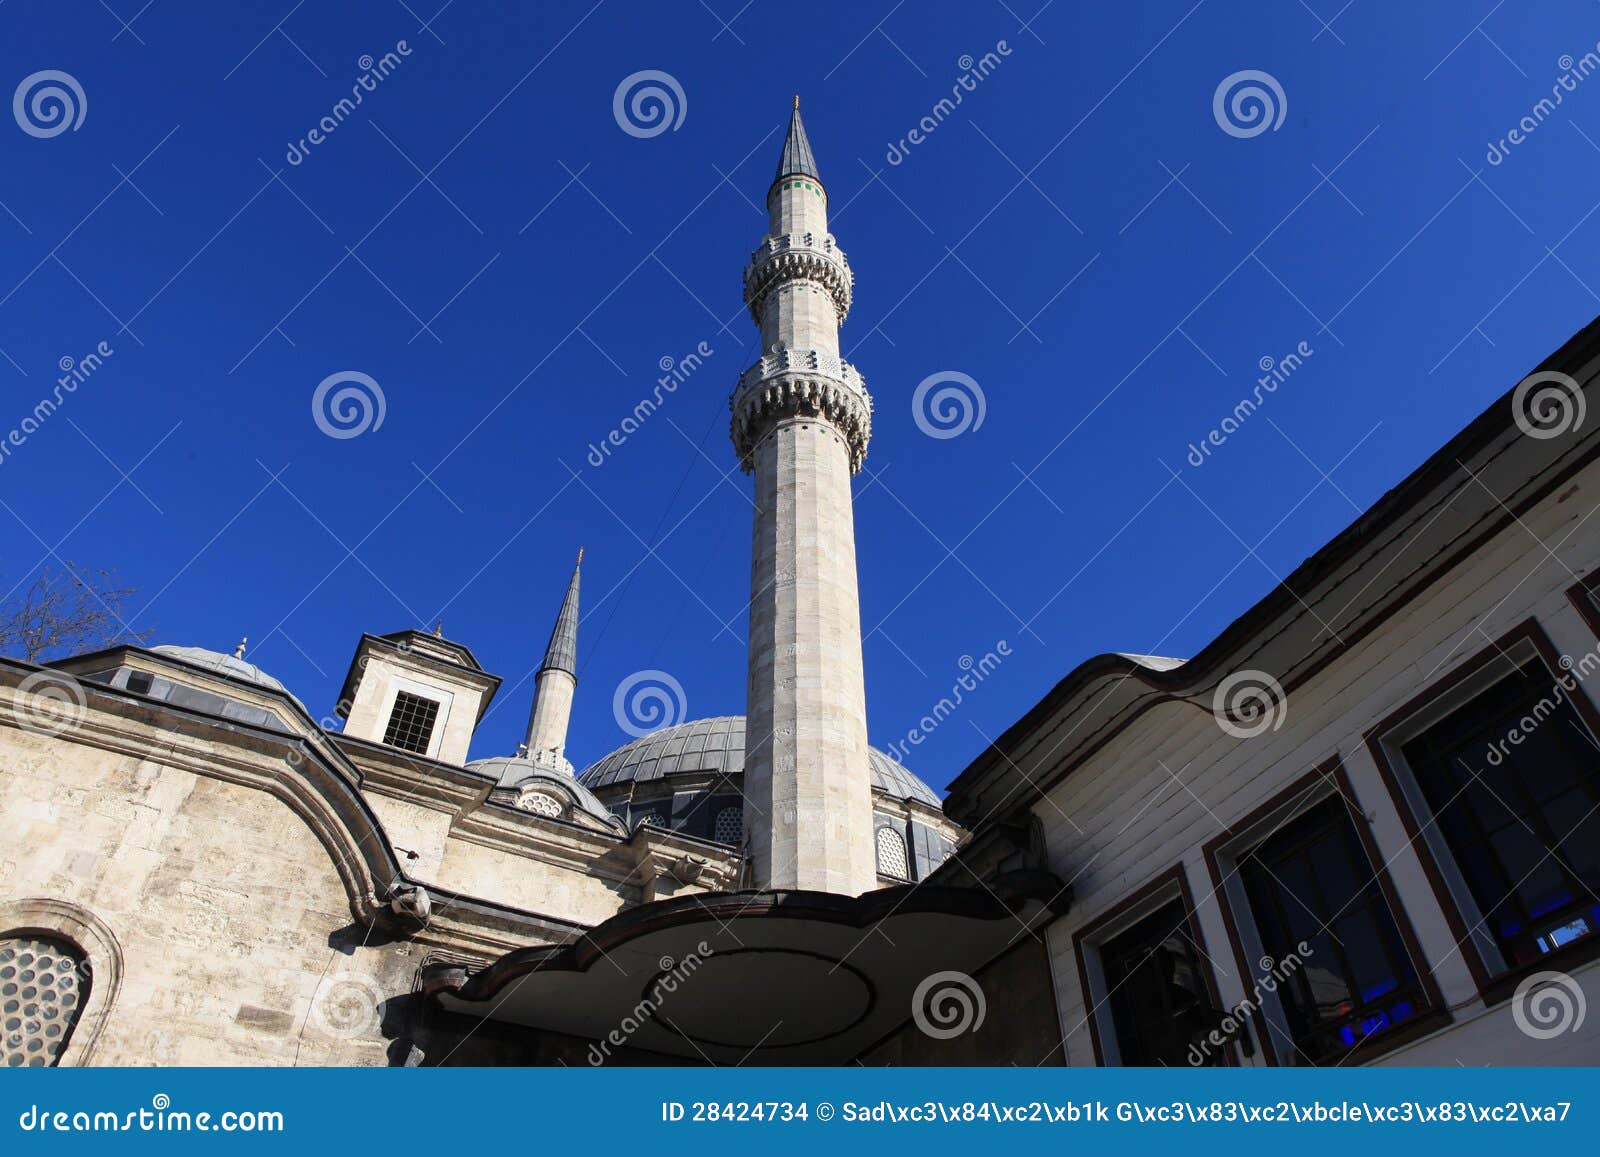 eyup mosque in istanbul.